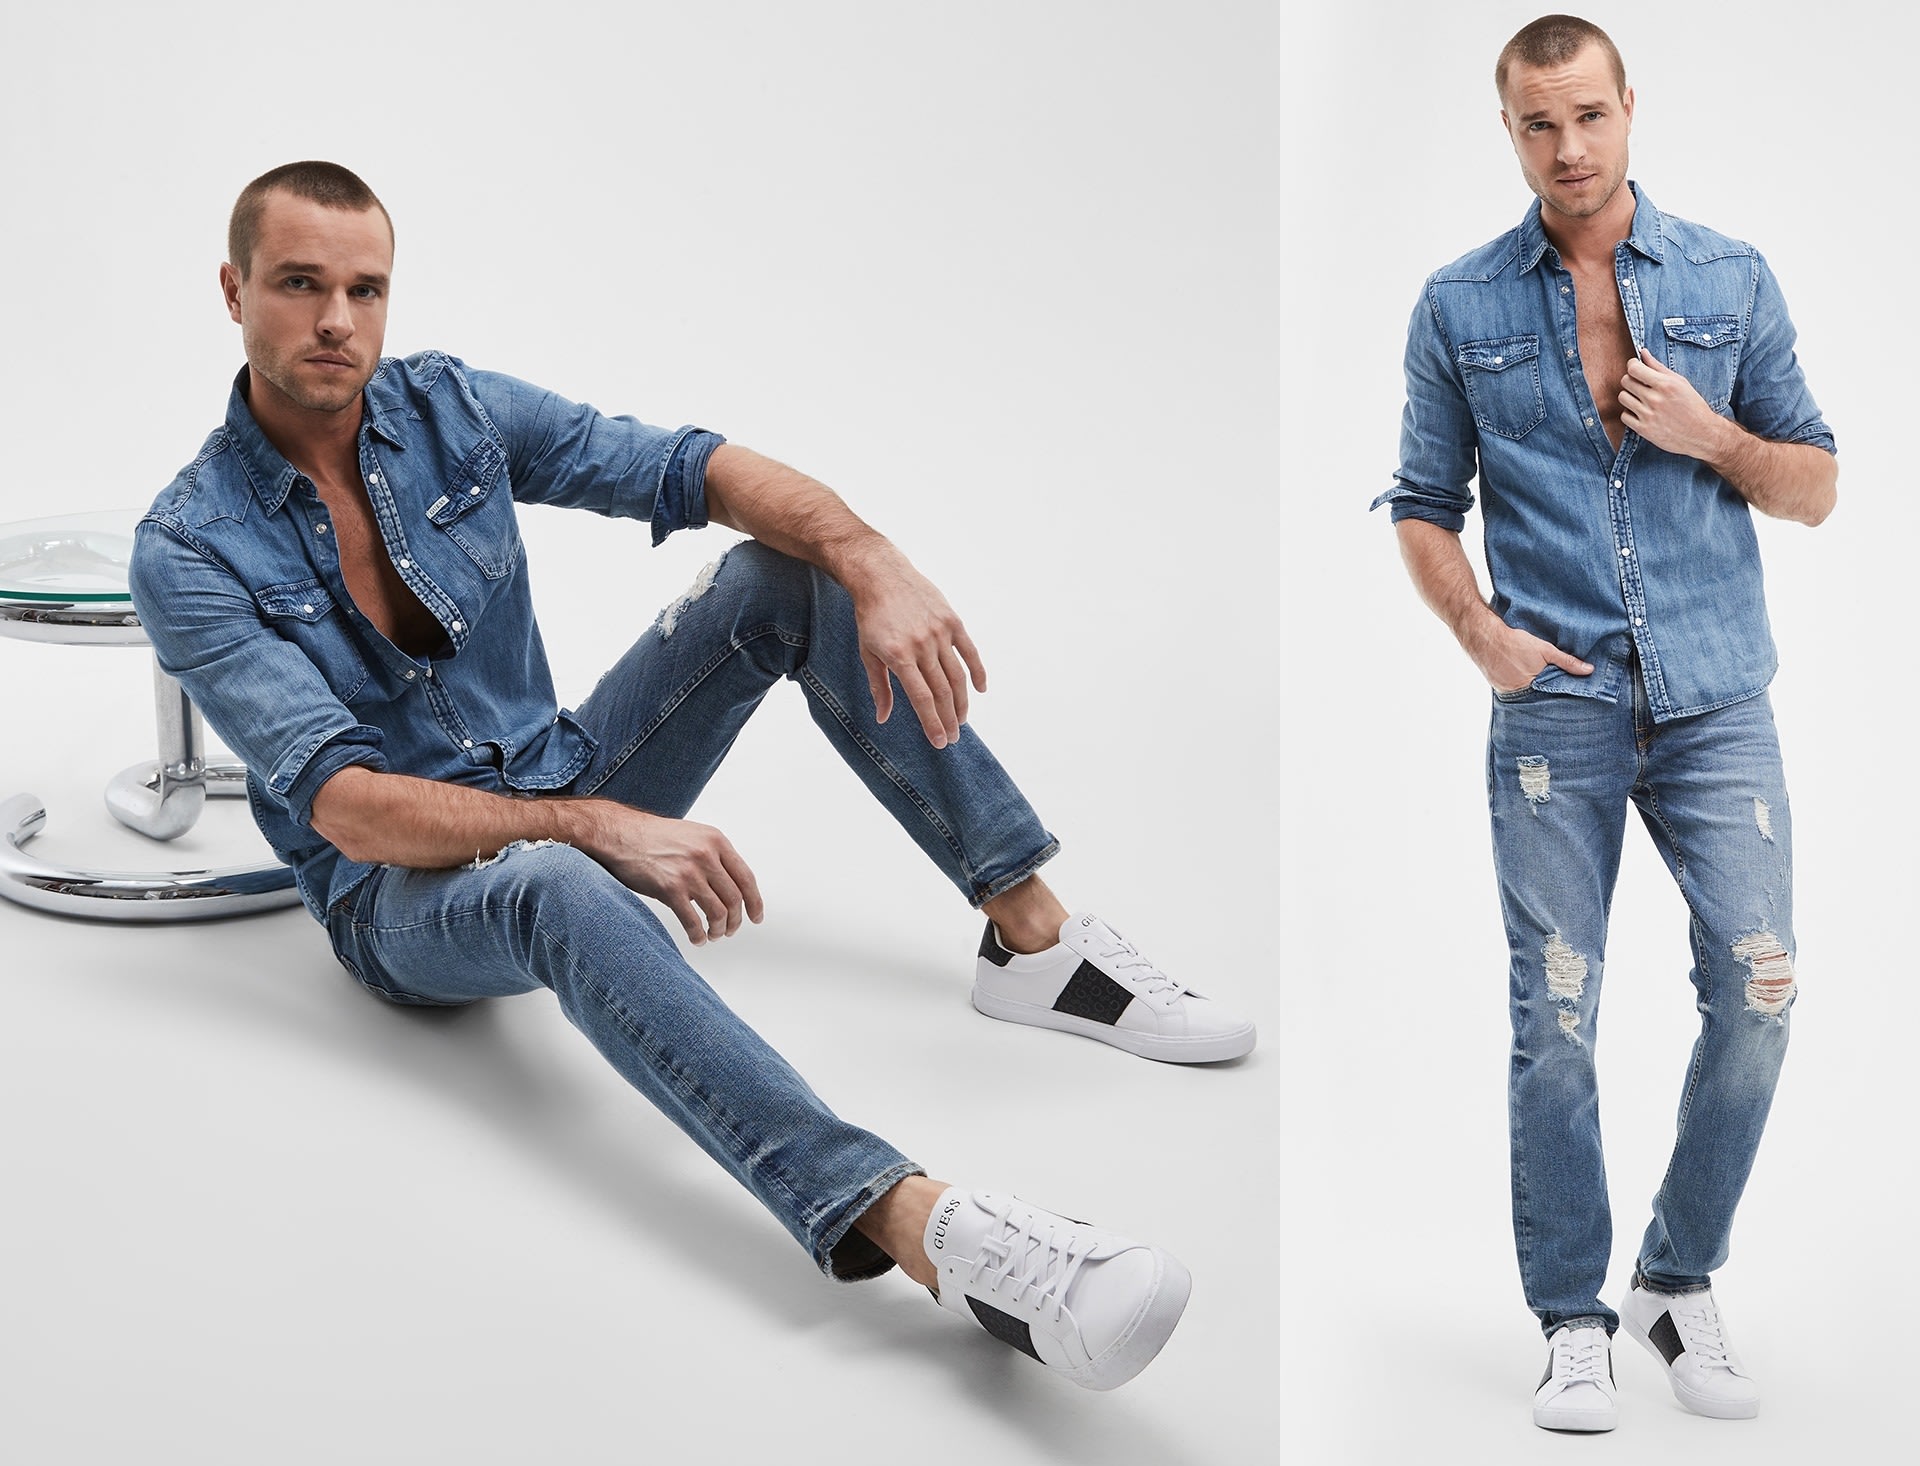 Men's Denim Fit and Style Guide - Find Your Perfect Fit